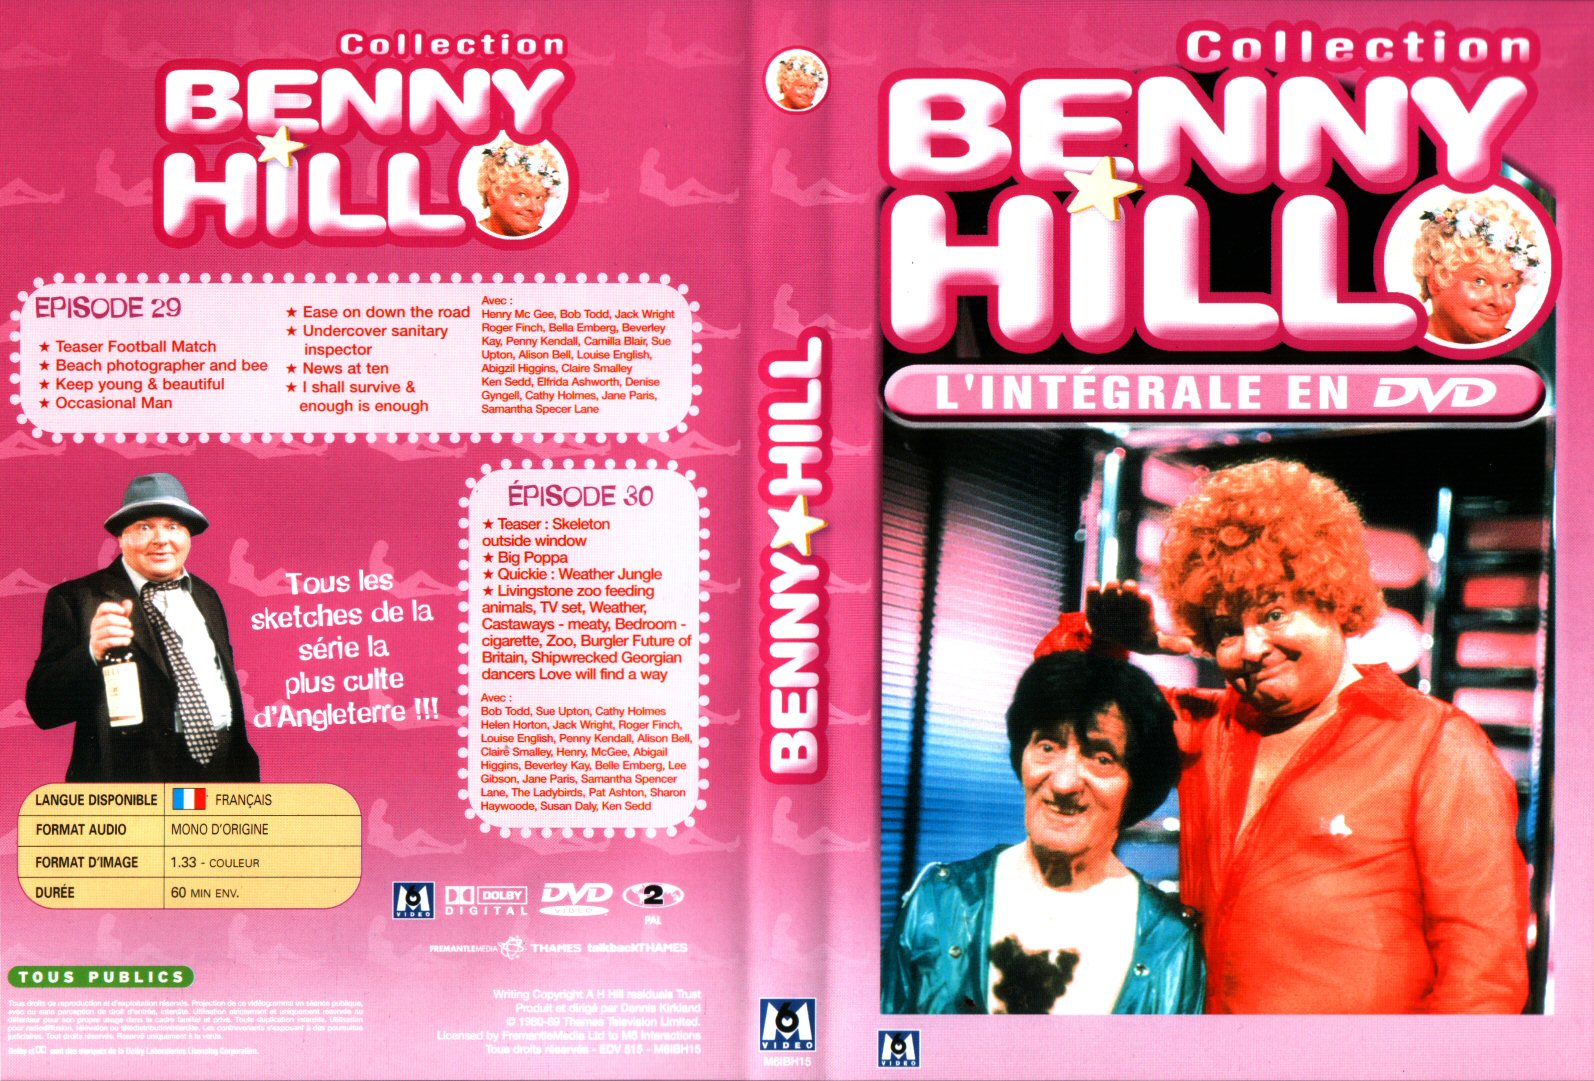 Jaquette DVD Benny Hill collection Episodes 29-30